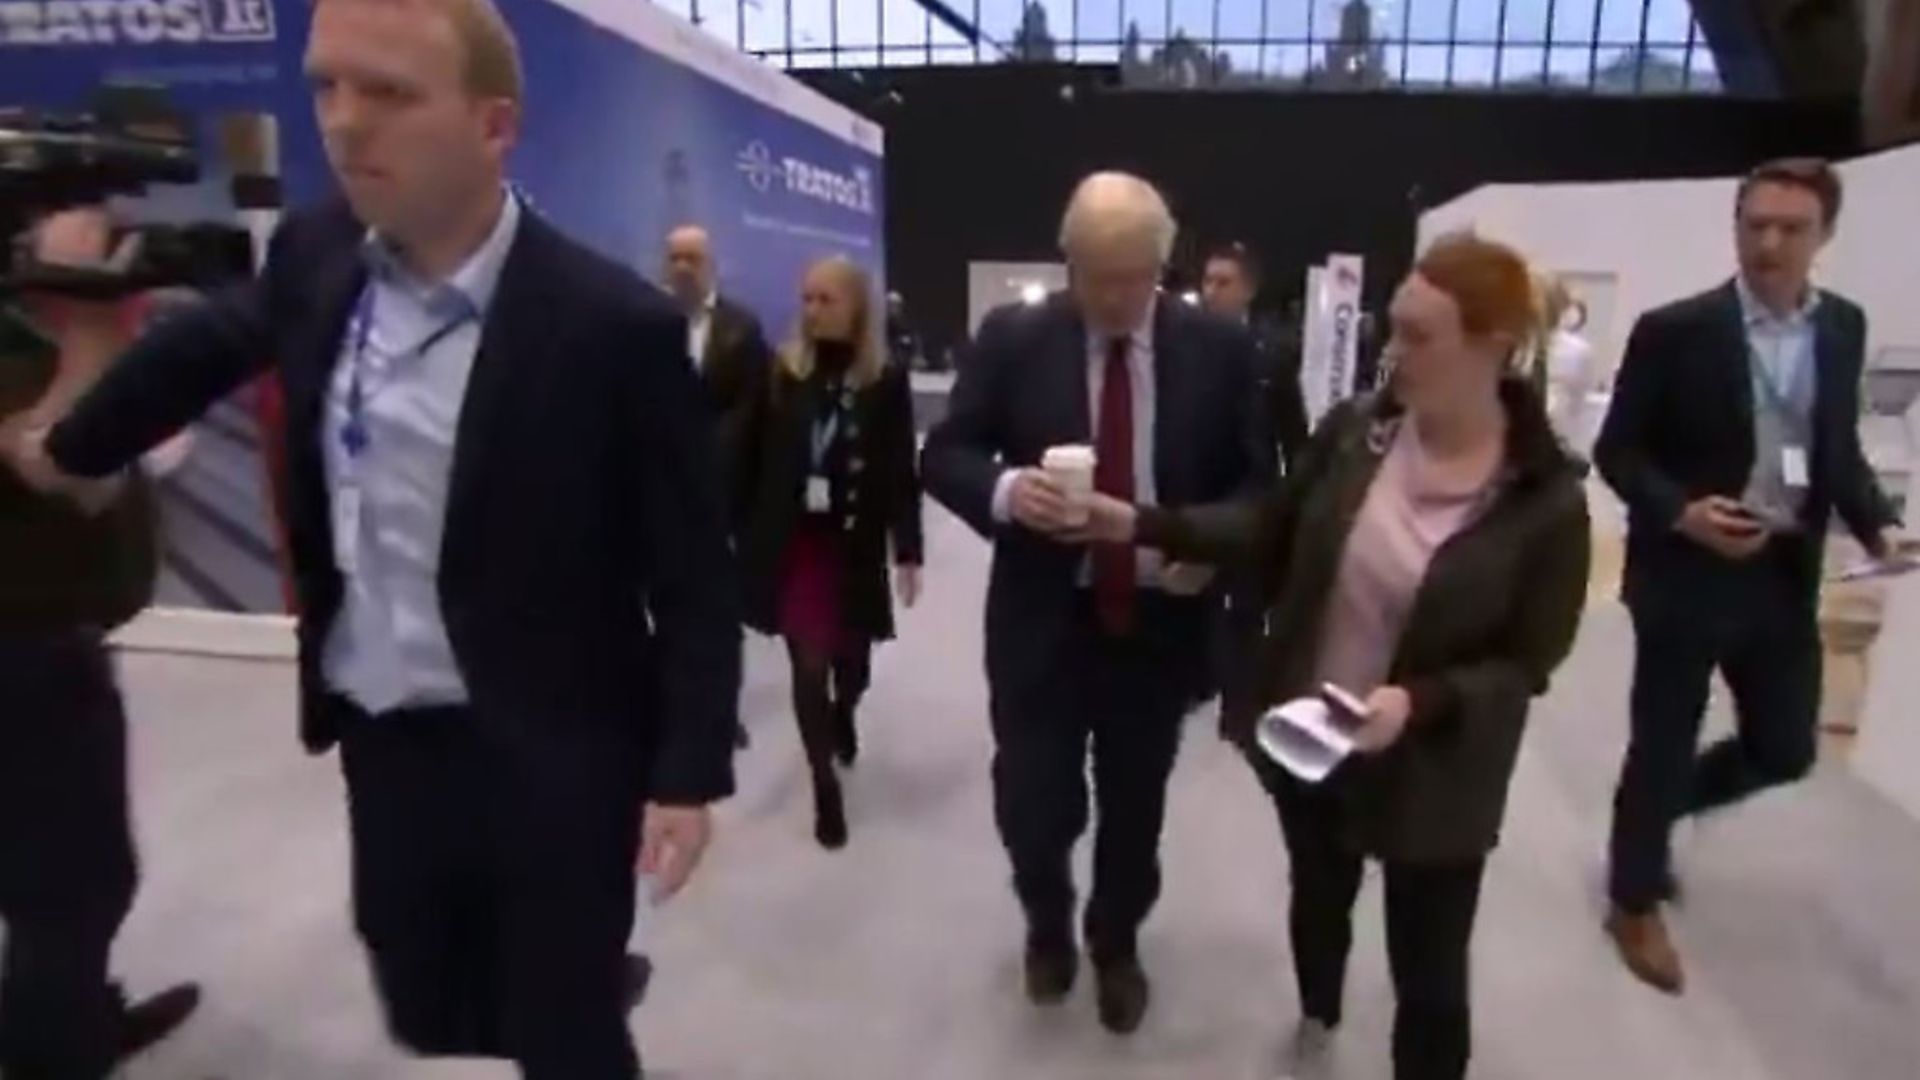 "No disposable cups." Twitter has had its fun with the most riveting political drama of the day at the Tory party conference. Picture: Channel 4 - Credit: Channel 4